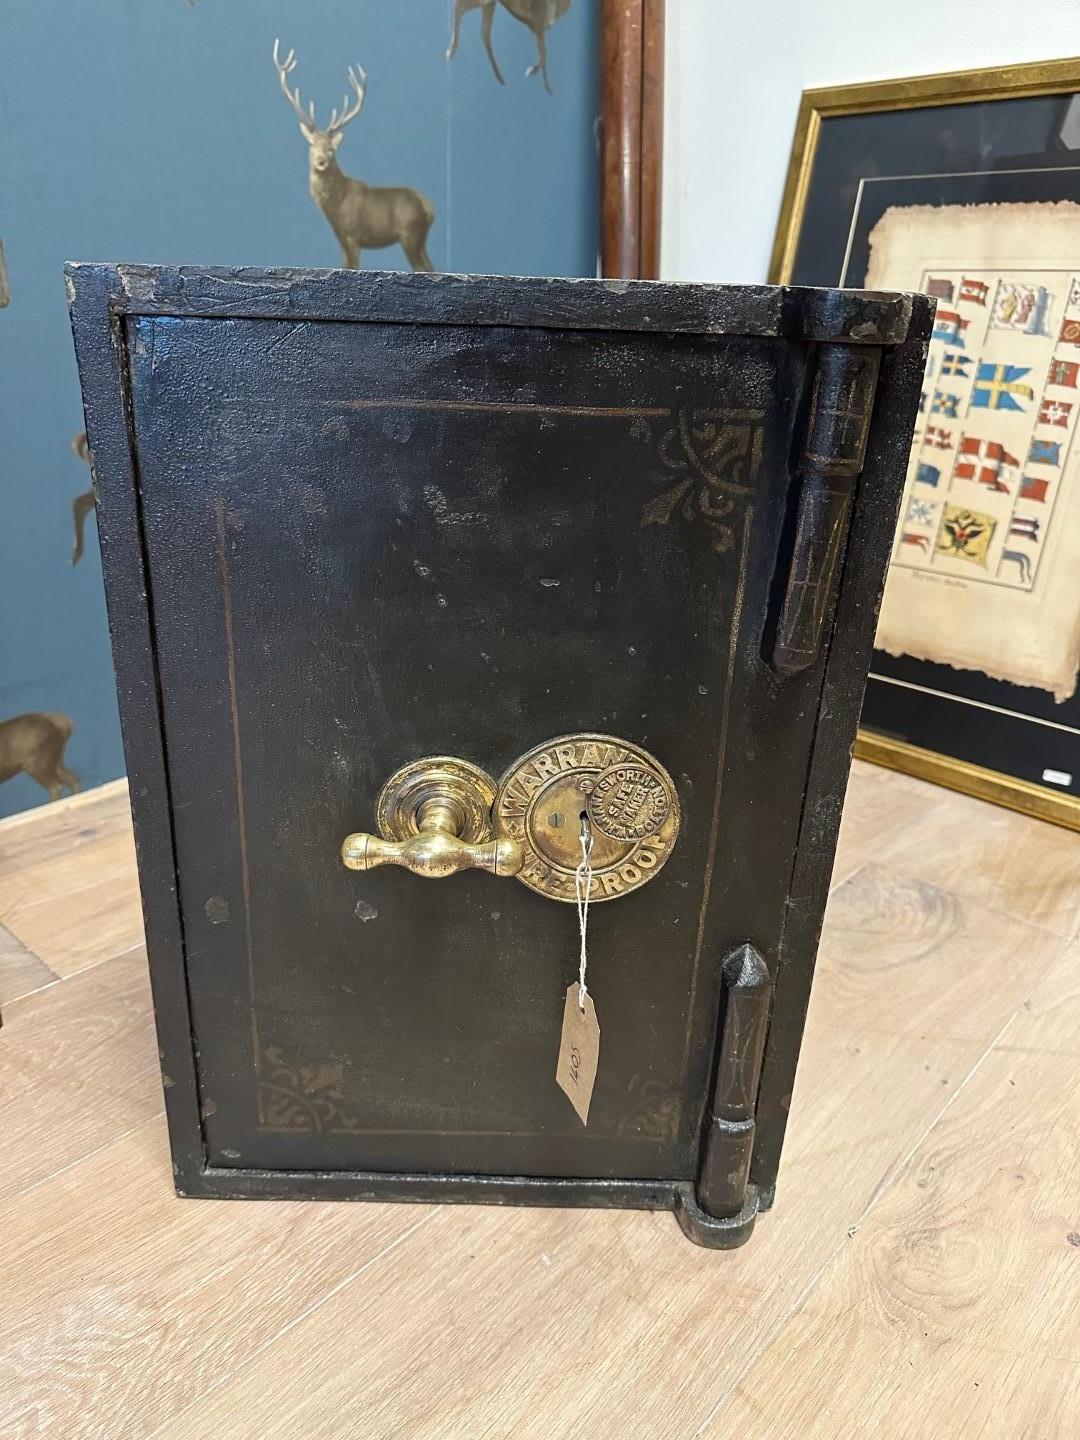 Beautiful antique American safe with working lock and original key. No key for the drawer on the inside, the safe is in completely original and beautifully weathered condition.

Origin: US
Period: Approx. 1890
Size:36cm x 36cm x h.51cm
Weight +/- 70